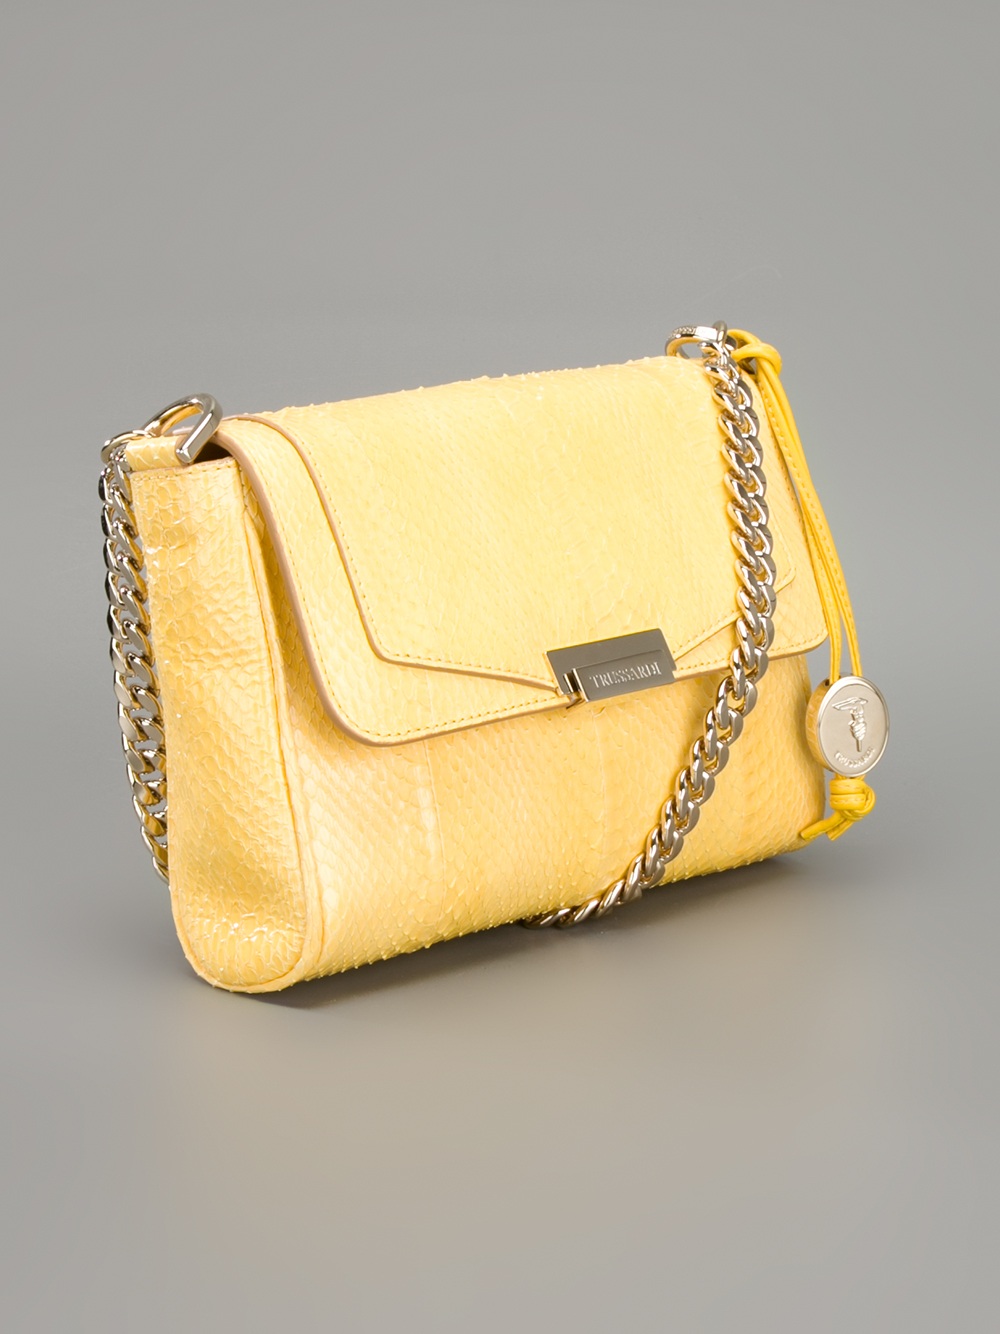 Trussardi Small Chain Shoulder Bag in Yellow - Lyst